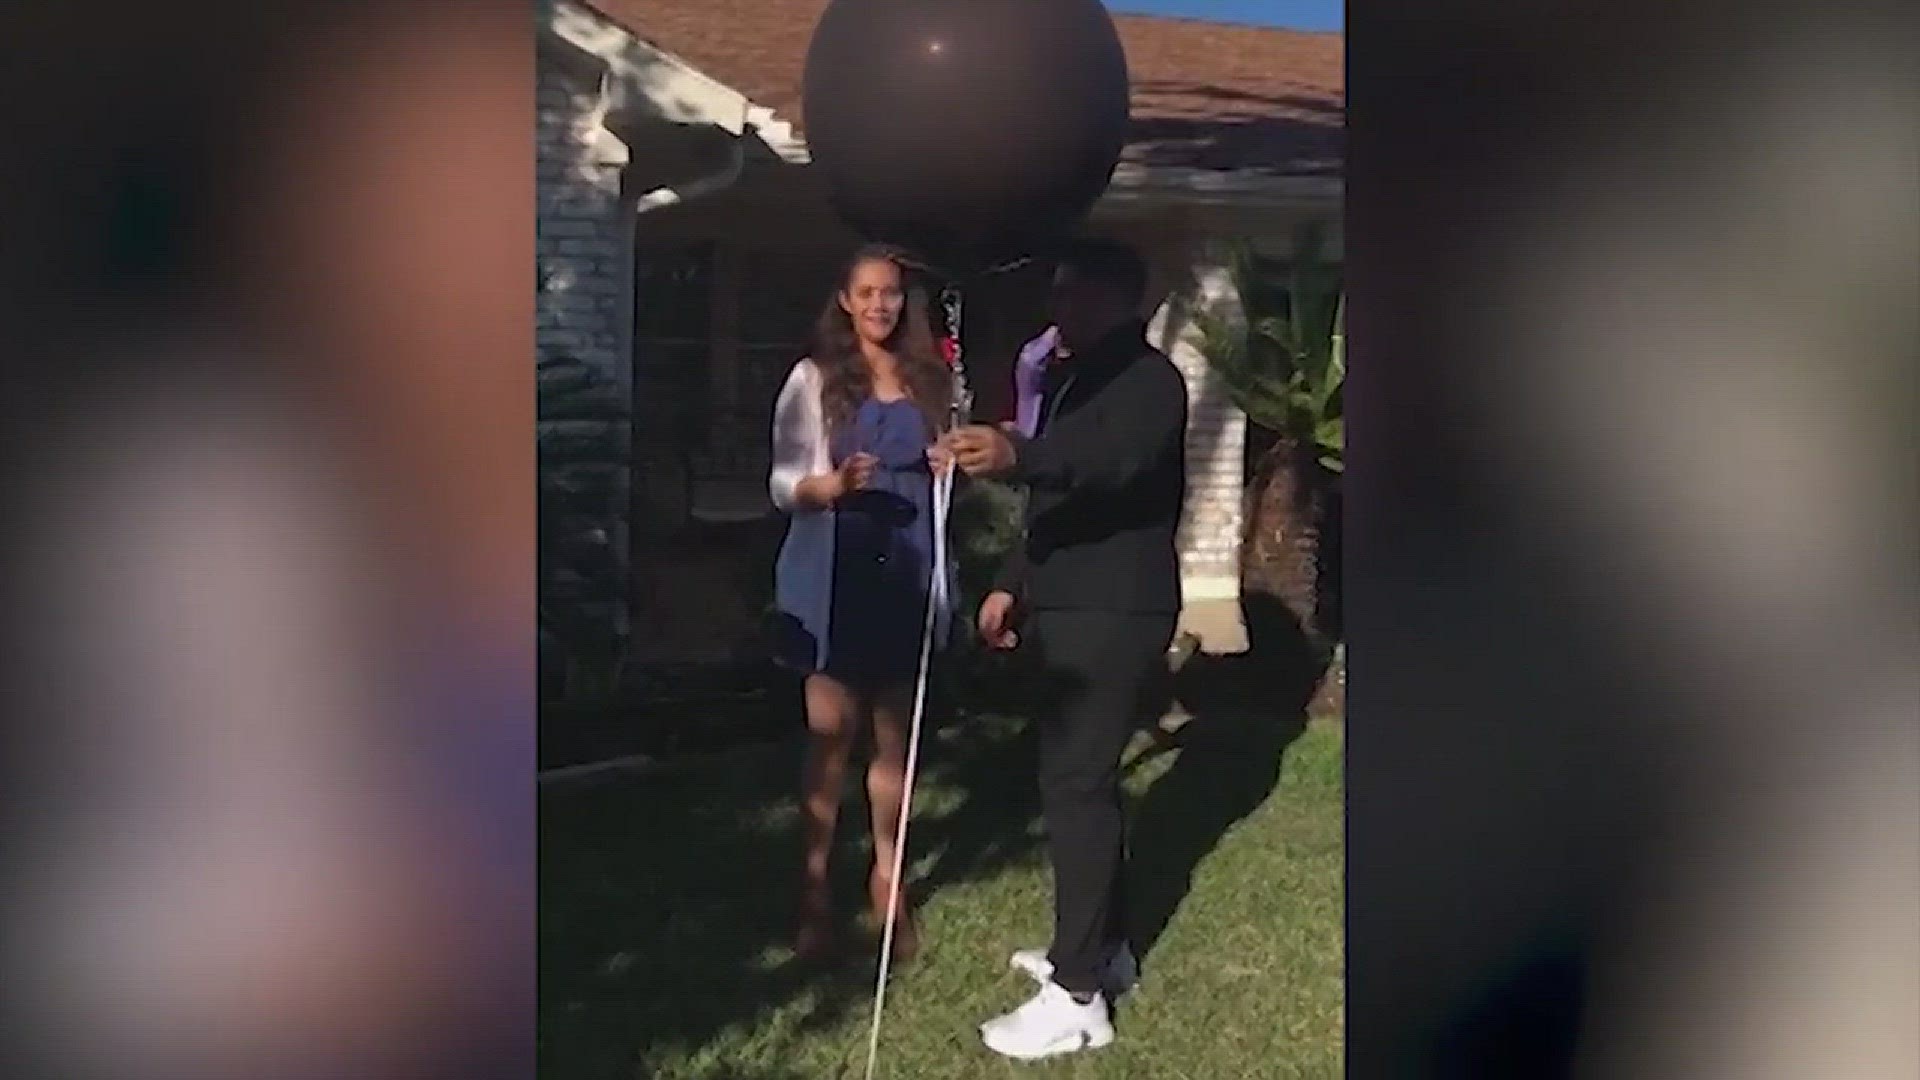 Video of a Pearland woman's gender reveal-turned-surprise engagement party got millions of views and drew thousands of comments on social media.